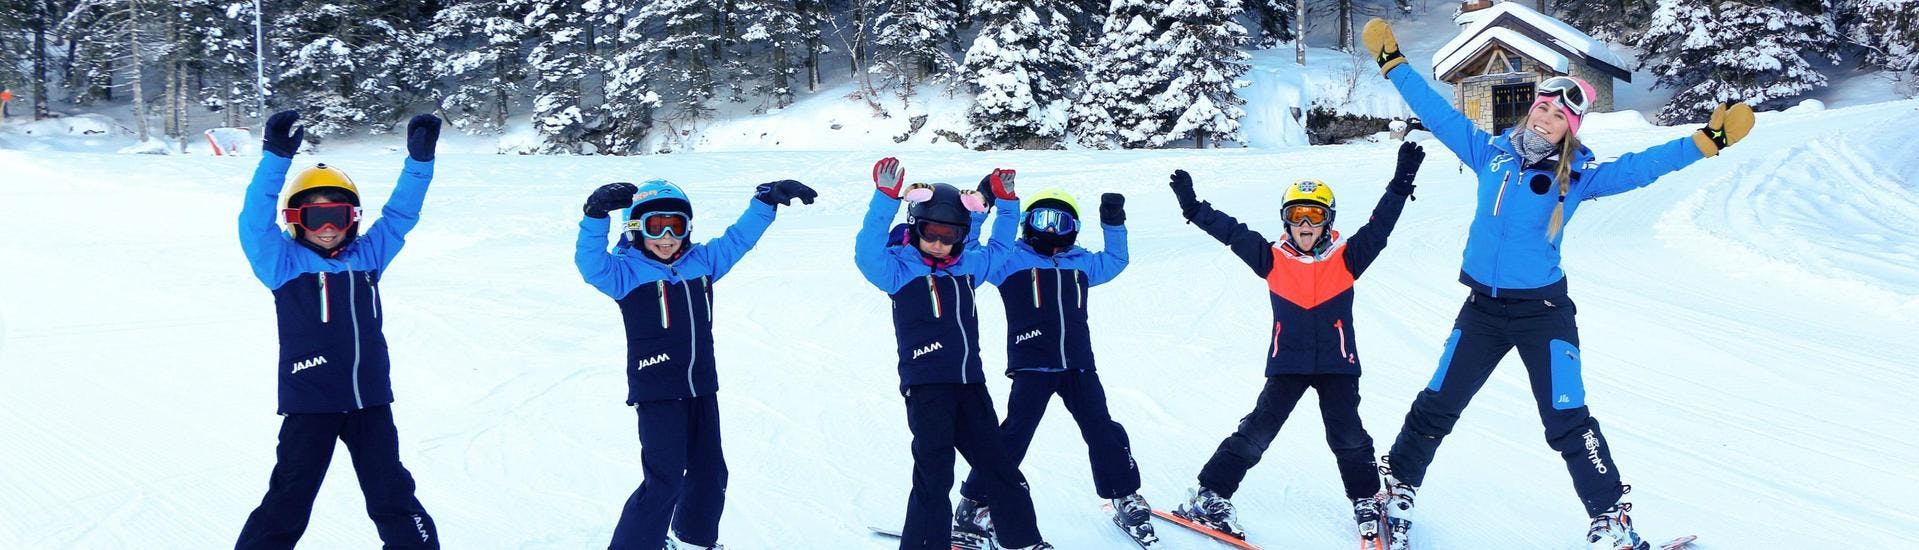 A group of kids is enjoying one of their ski lessons with their ski instructor from the ski school Scuola di Sci e Snowboard Alpe Cimbra in the ski resort of Folgaria.